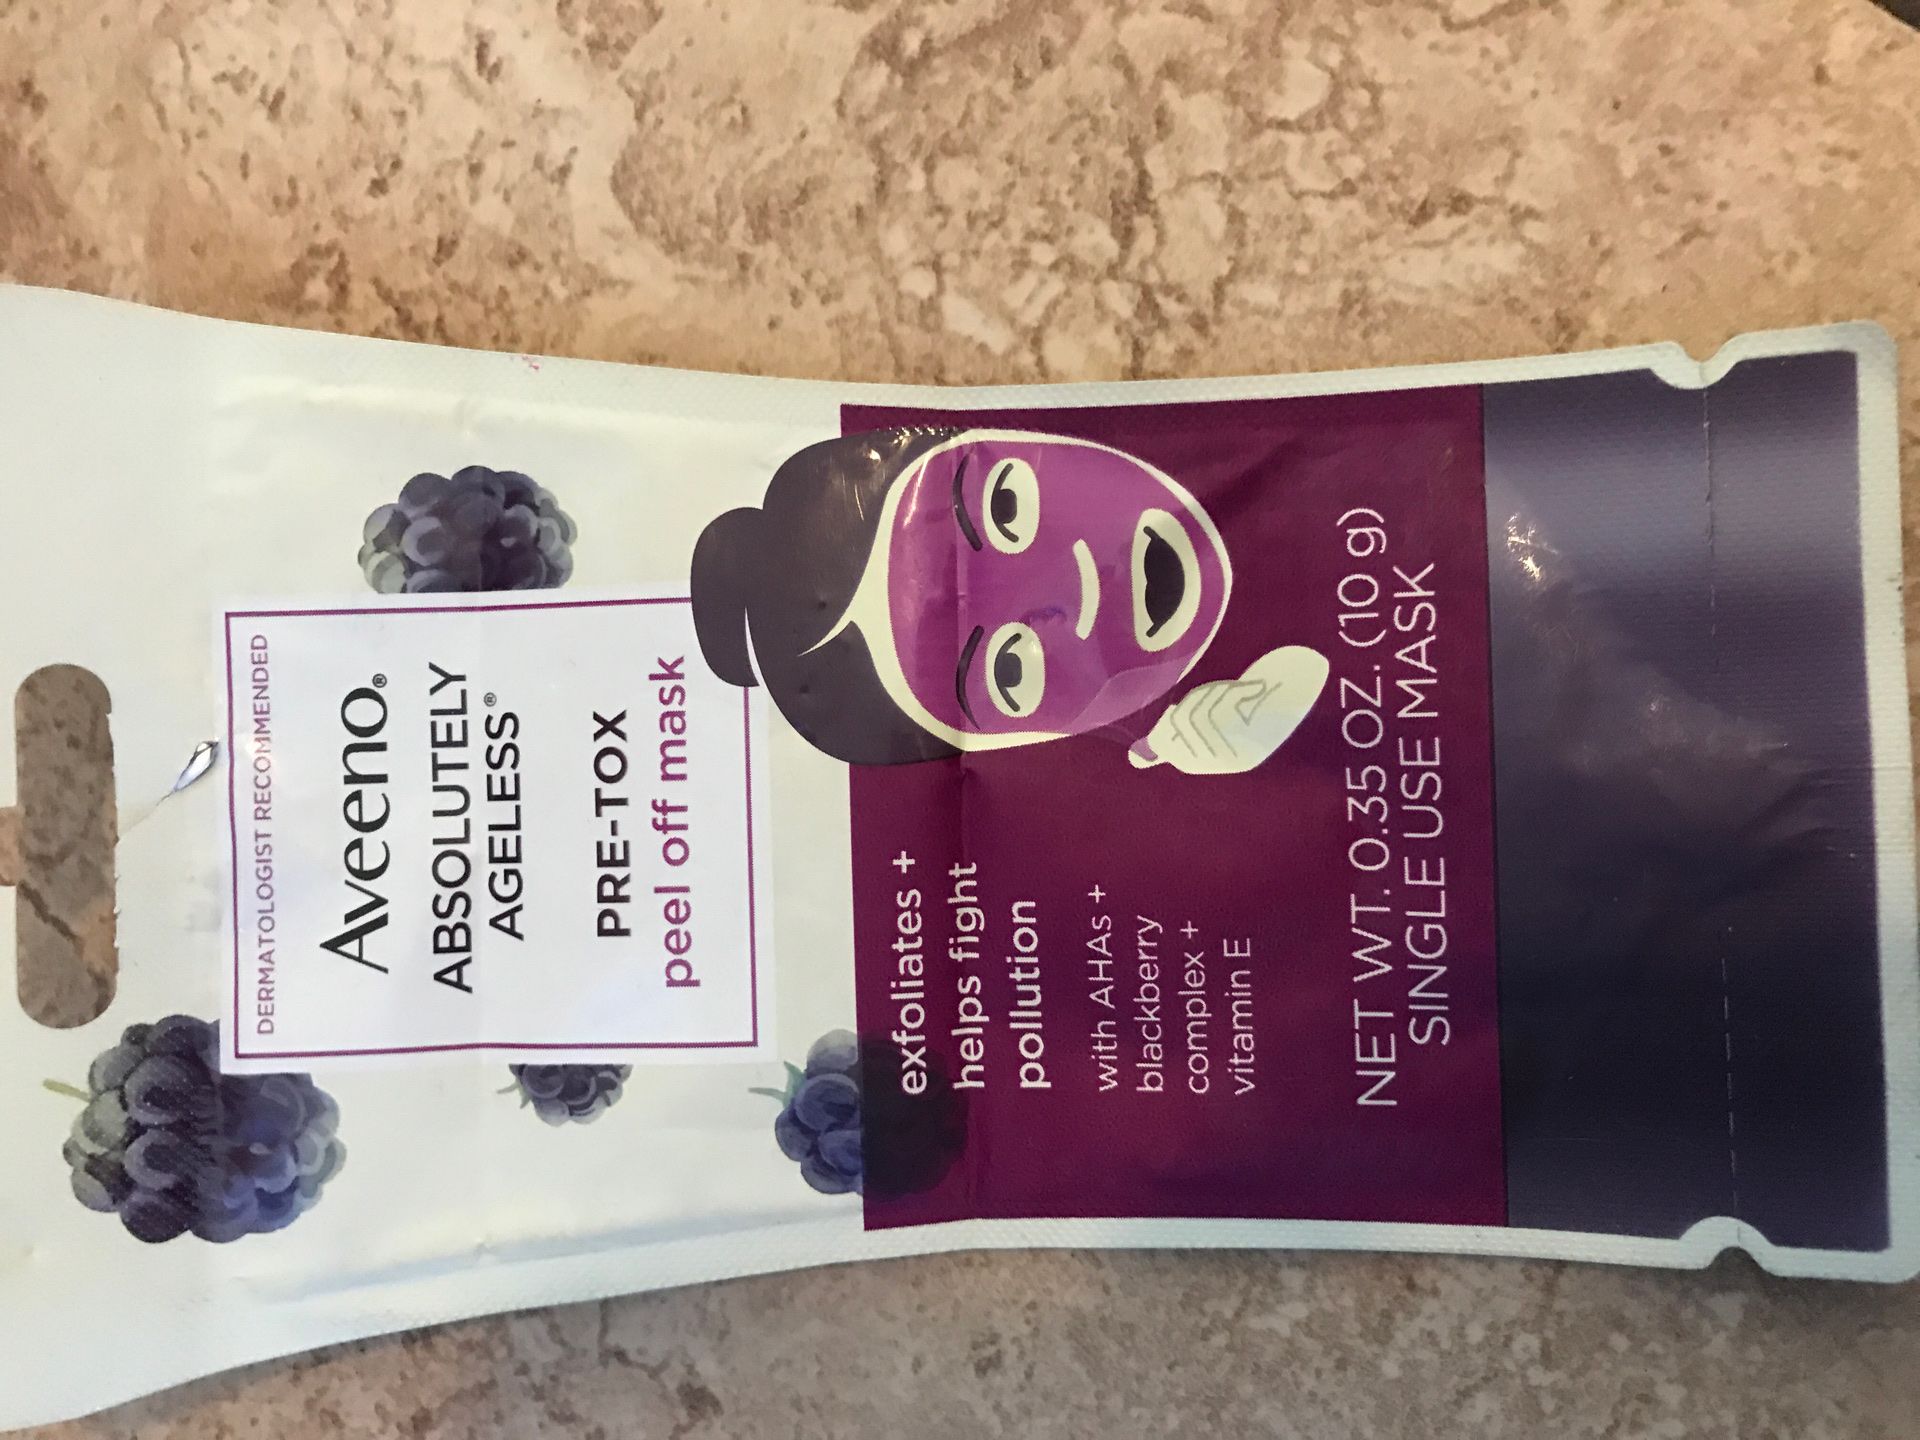 Peel off face mask never used